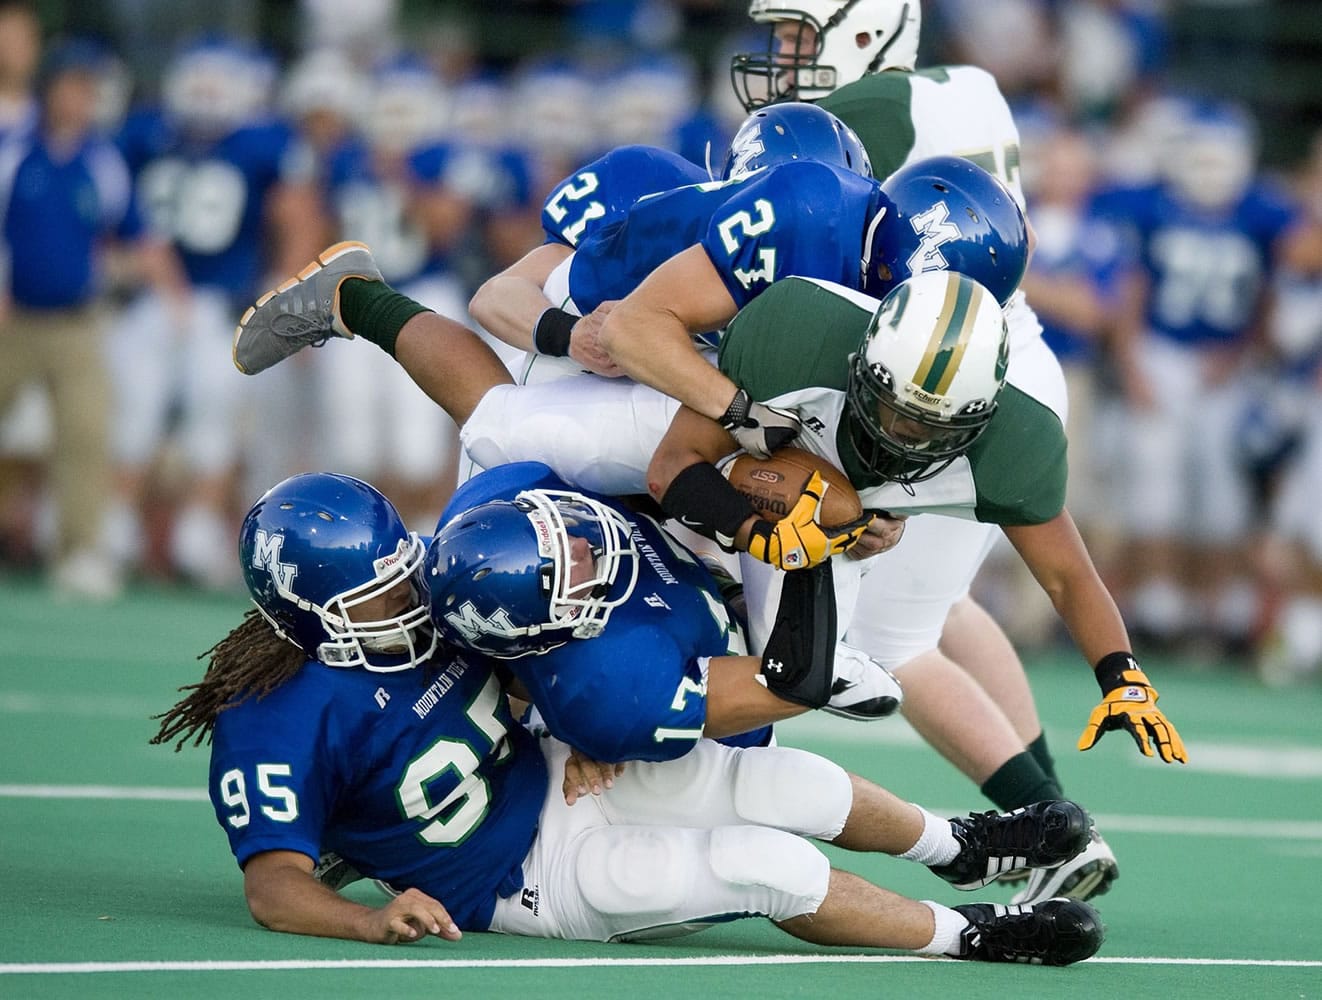 Mountain View players get piled on as Evergreen running back Jared Telles is taken down during the first week of the 2011 season at McKenzie Stadium.